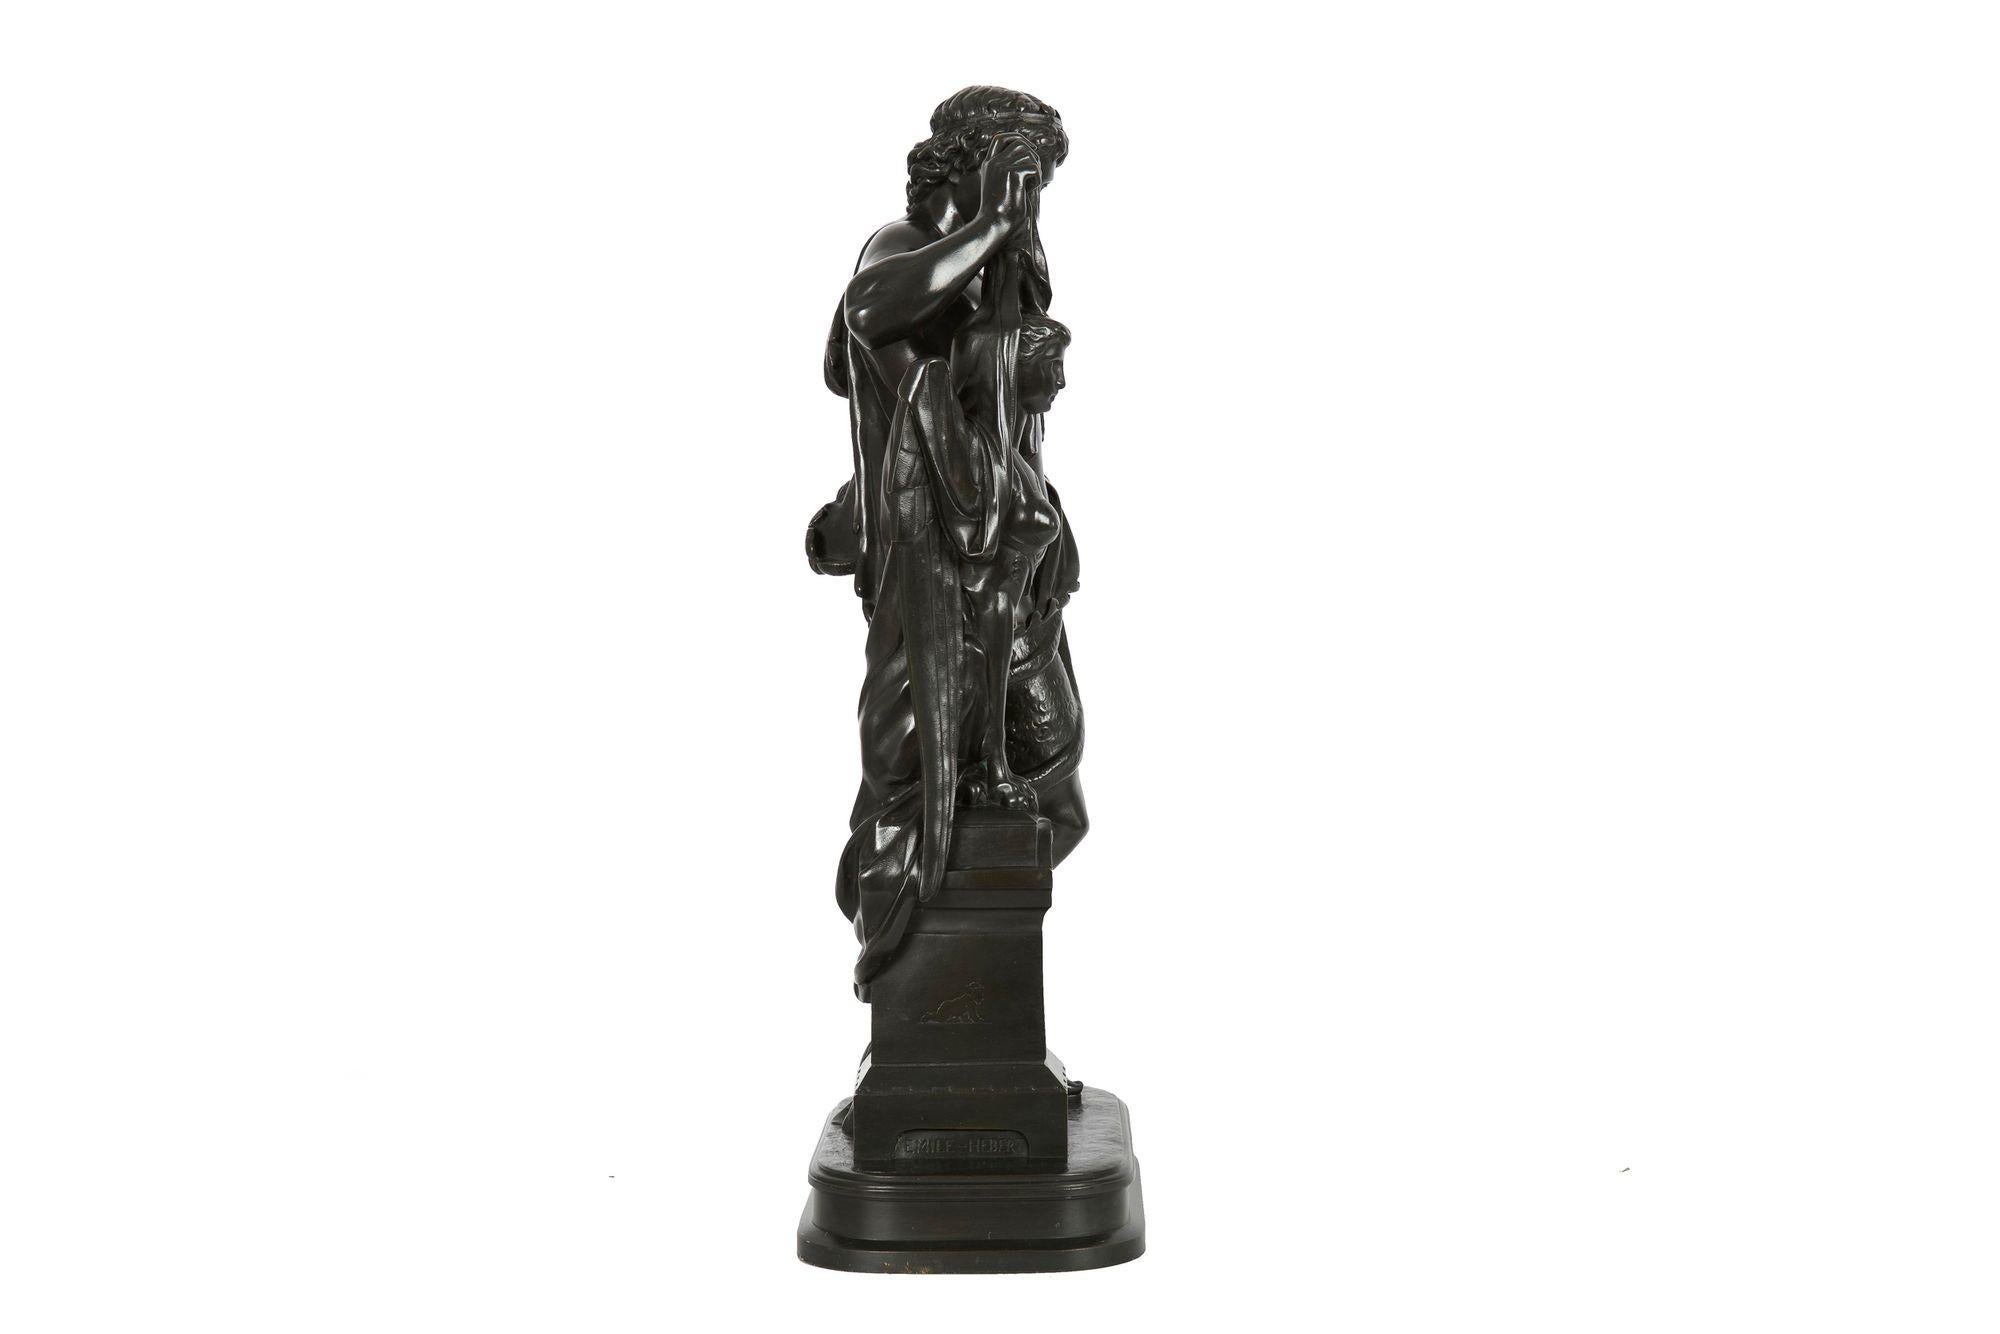 Romantic French Antique Bronze Sculpture “Oedipus and Sphinx” by Pierre Emile Hebert